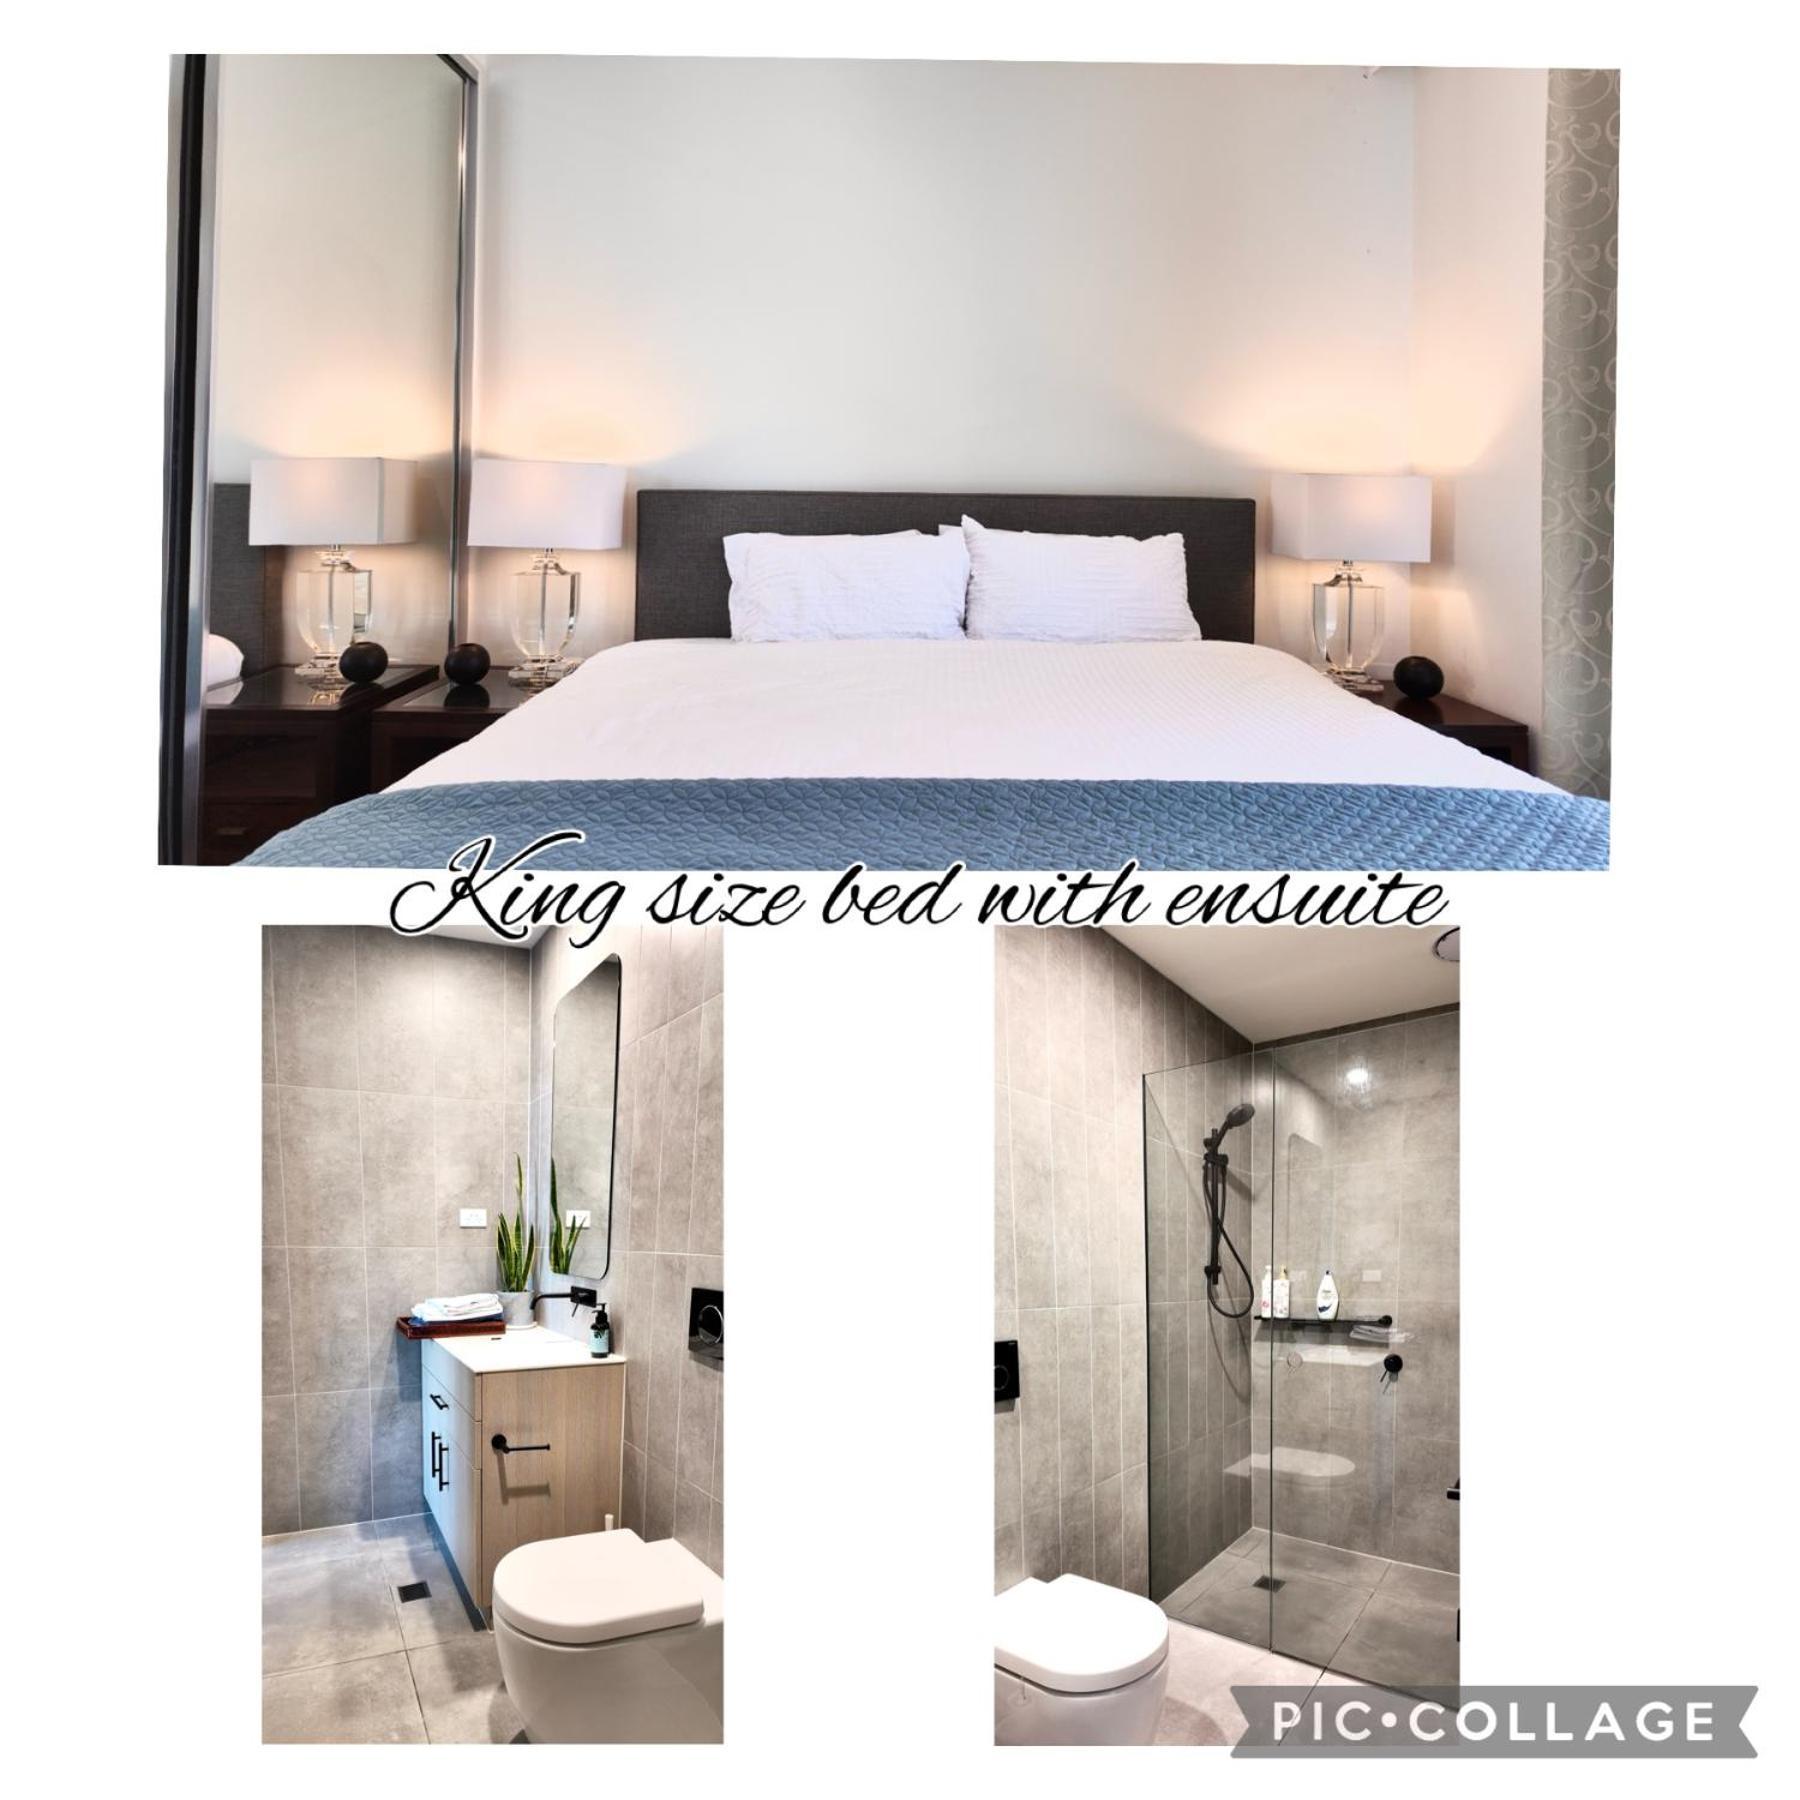 M-City Apartment - Executive Twin King Ensuites - Fully Equipped - Free Parking, Fast Wifi, Smart Tv, Netflix, Complementary Drinks & Amenities - M-City Shopping Centre Clayton 3168 Kültér fotó